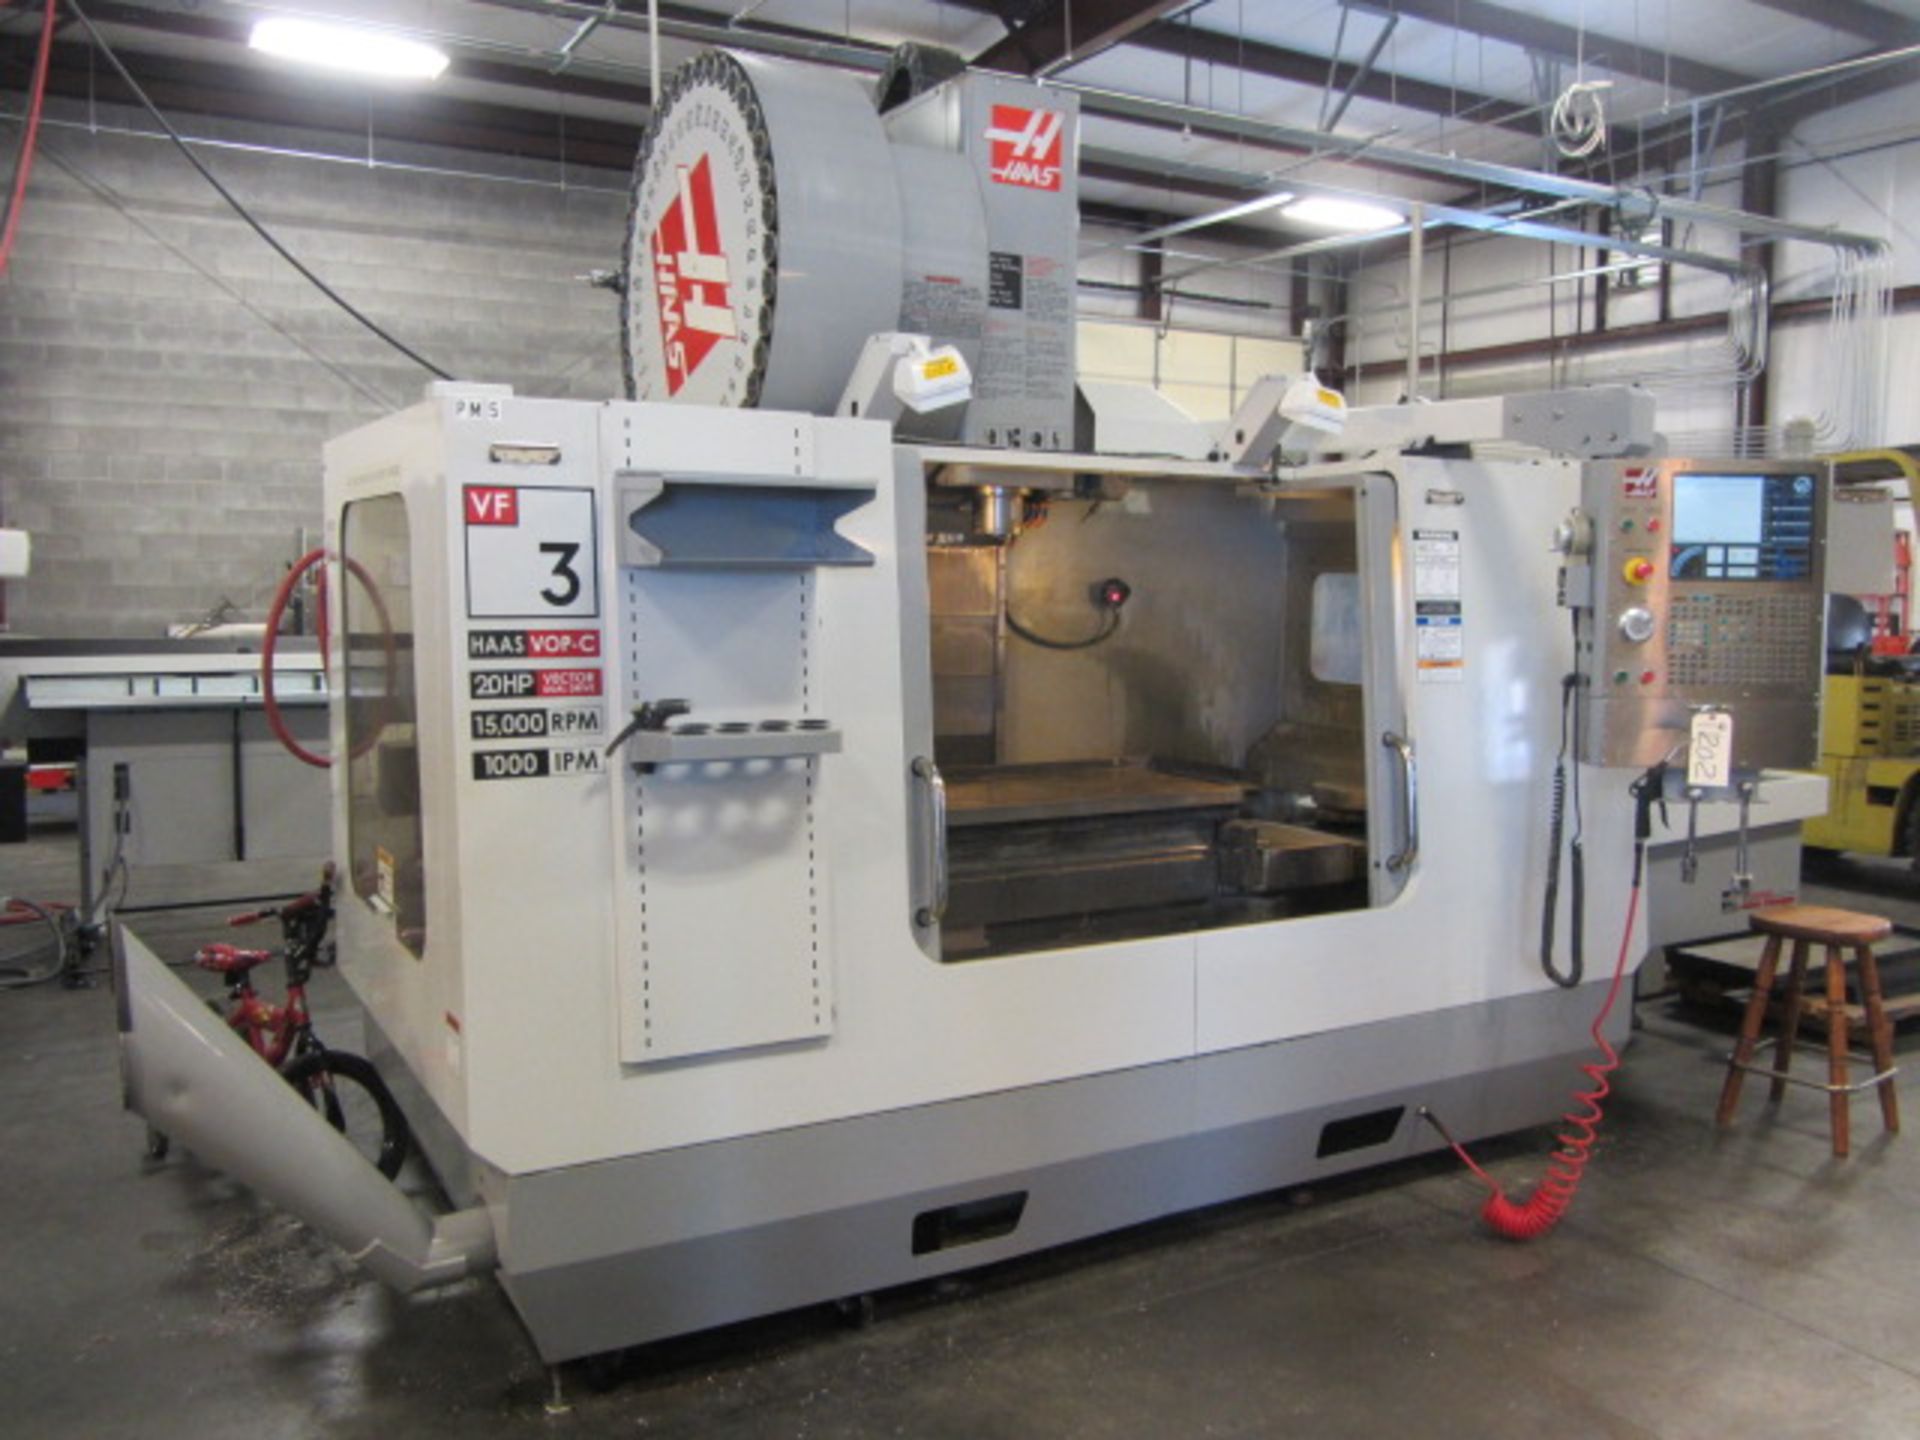 Haas VF3DAPC 4-Axis CNC Vertical Machining Center with Dual Pallet Changer, Intuitive Probing,